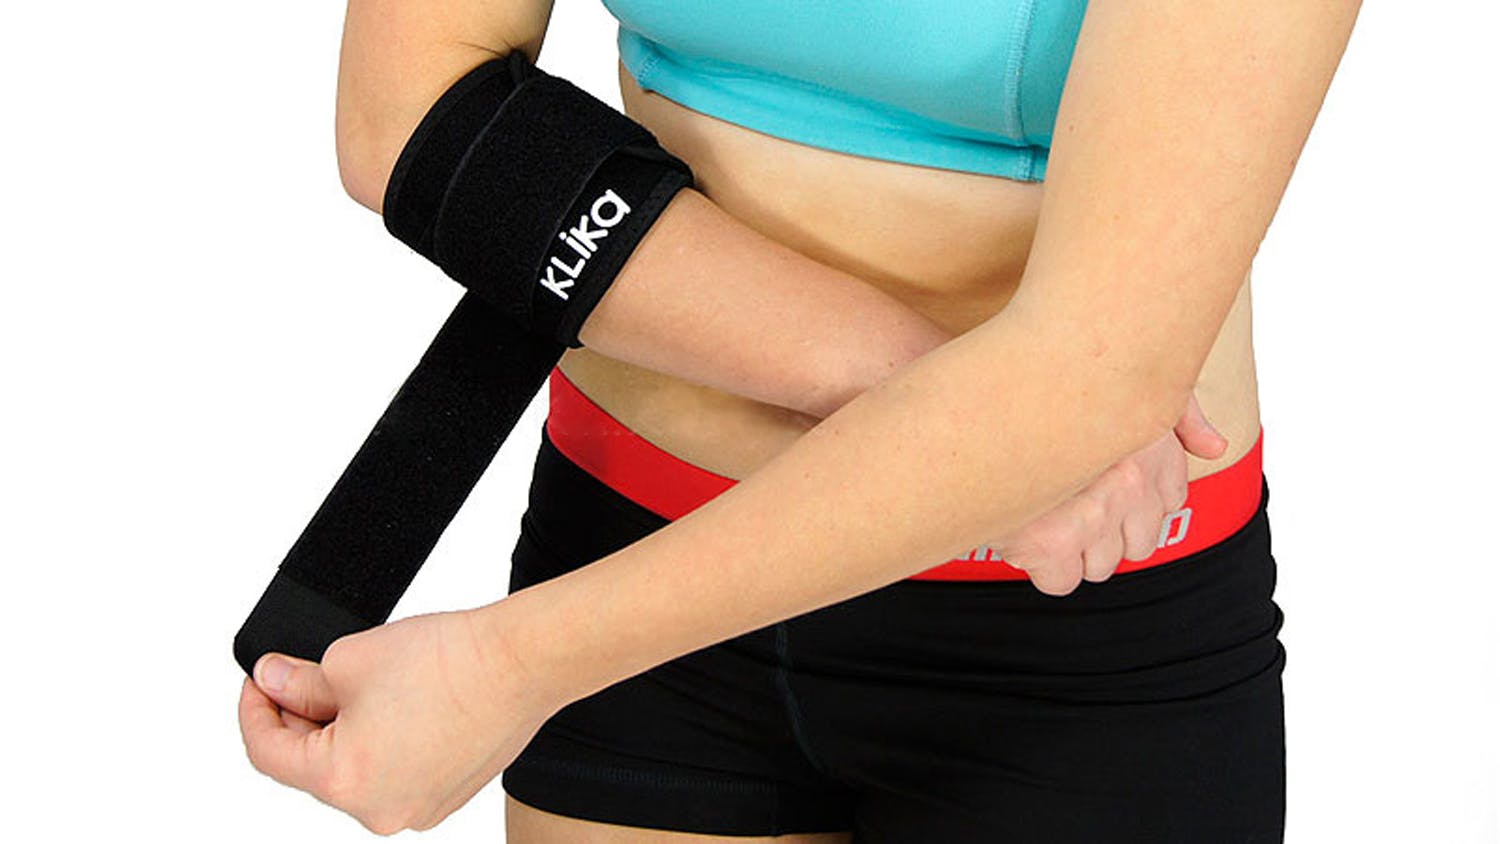 Powertrain Elbow Compression Support Bandage Wrap